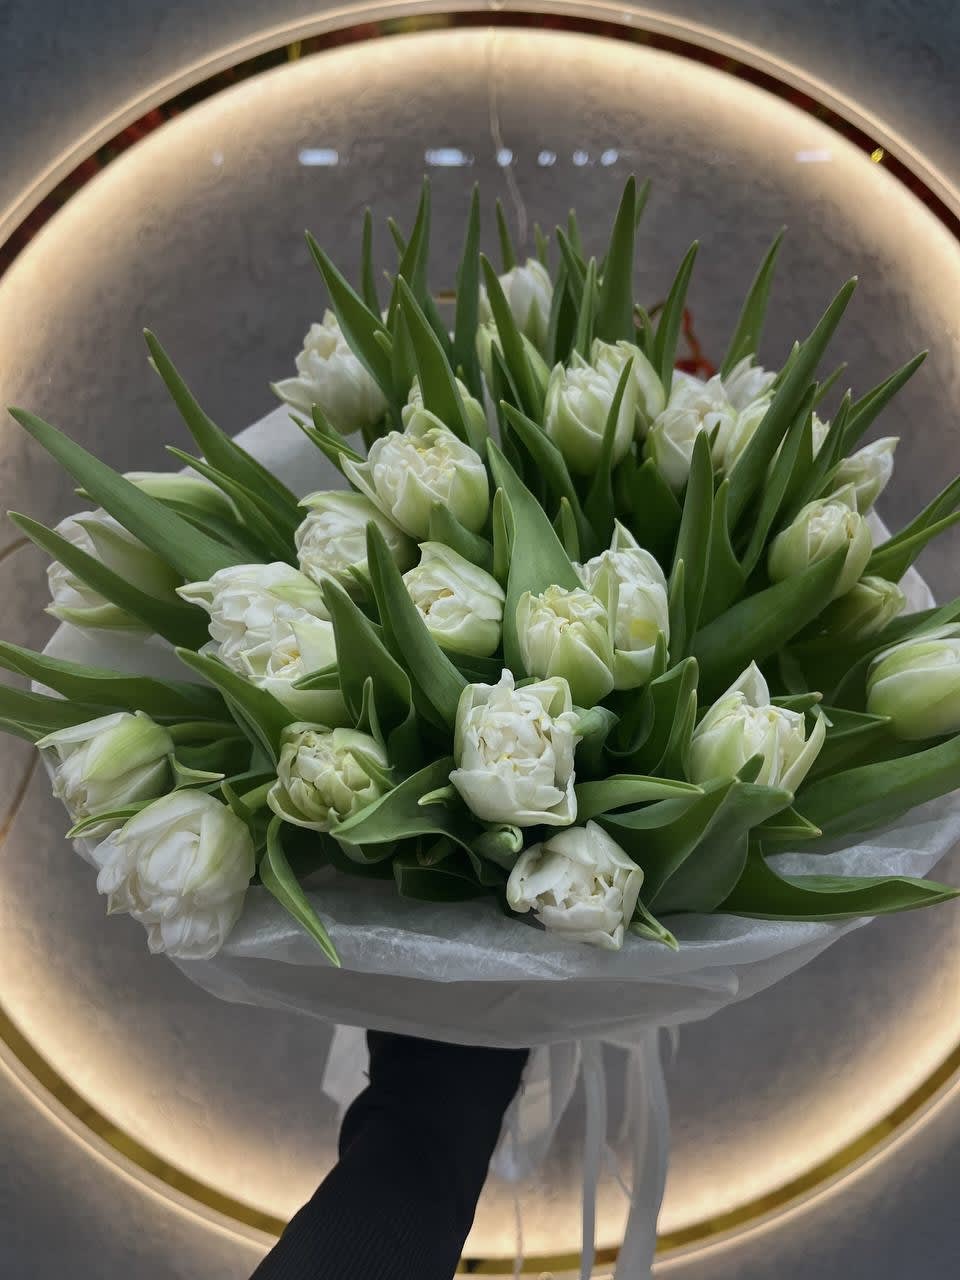 White Tulips - Flowers will be delivered approximately as pictured